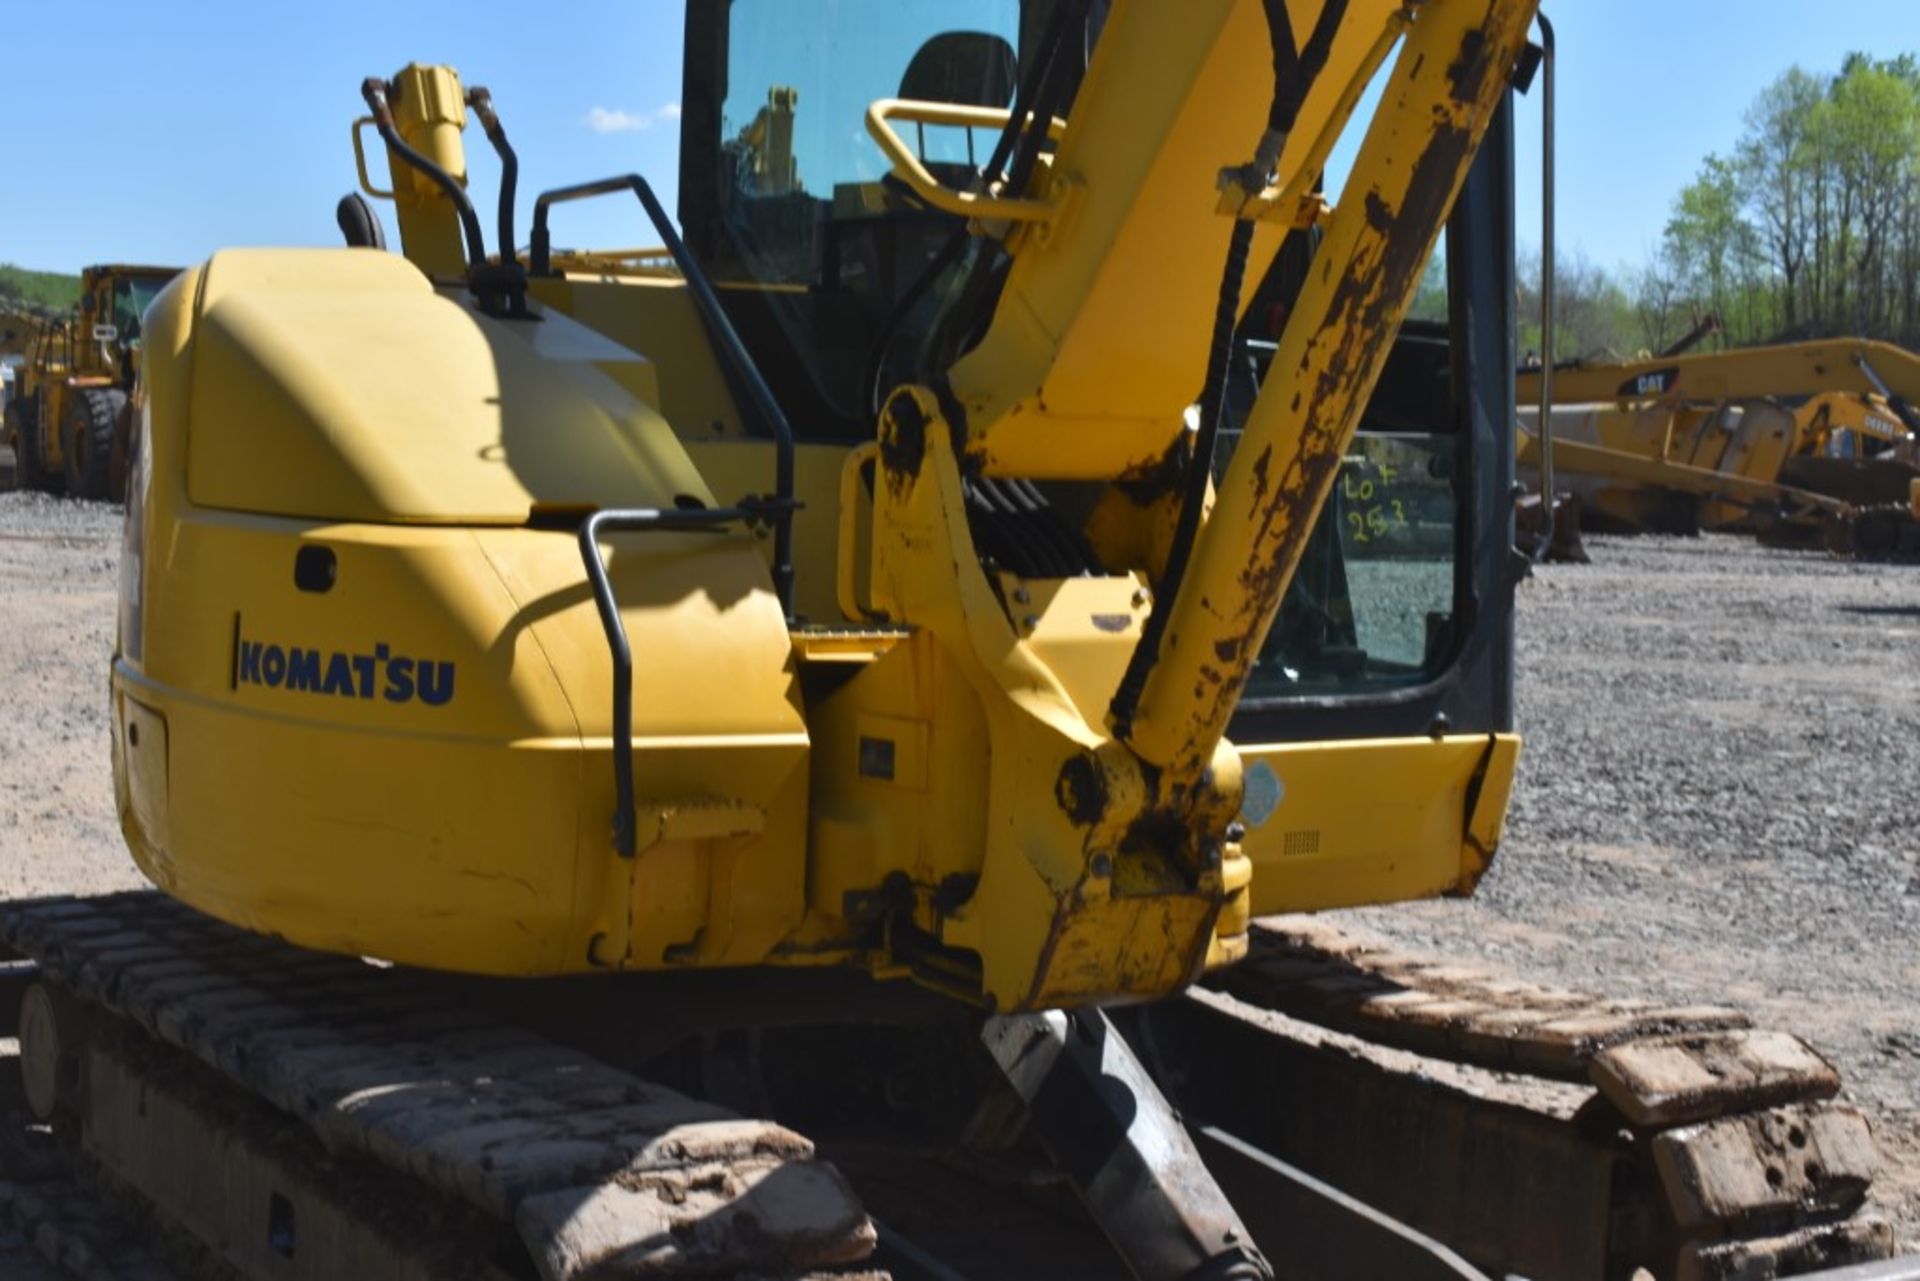 Komatsu PC88MR-8 Excavator 8704 Hours, Runs and Operates, WB 24" Bucket, Quick Coupler, Auxiliary - Image 14 of 49